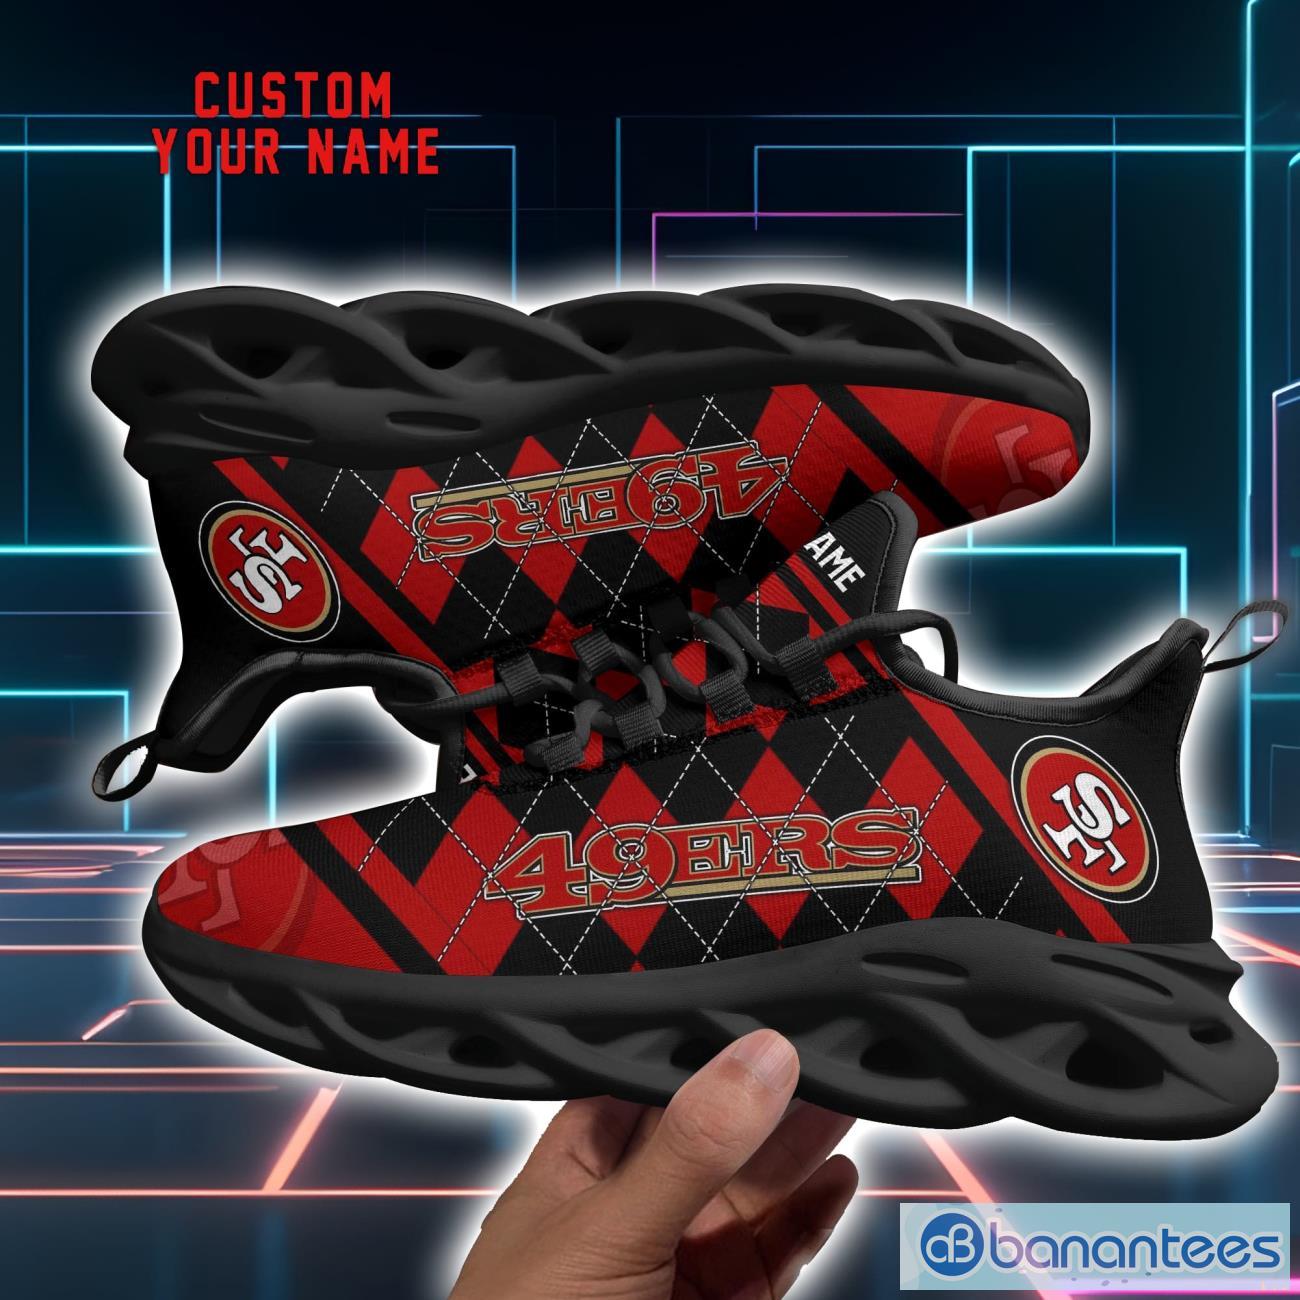 San Francisco 49ers NFL Custom Name Caro Pattern Designs Max Soul Shoes Sneakers Product Photo 1